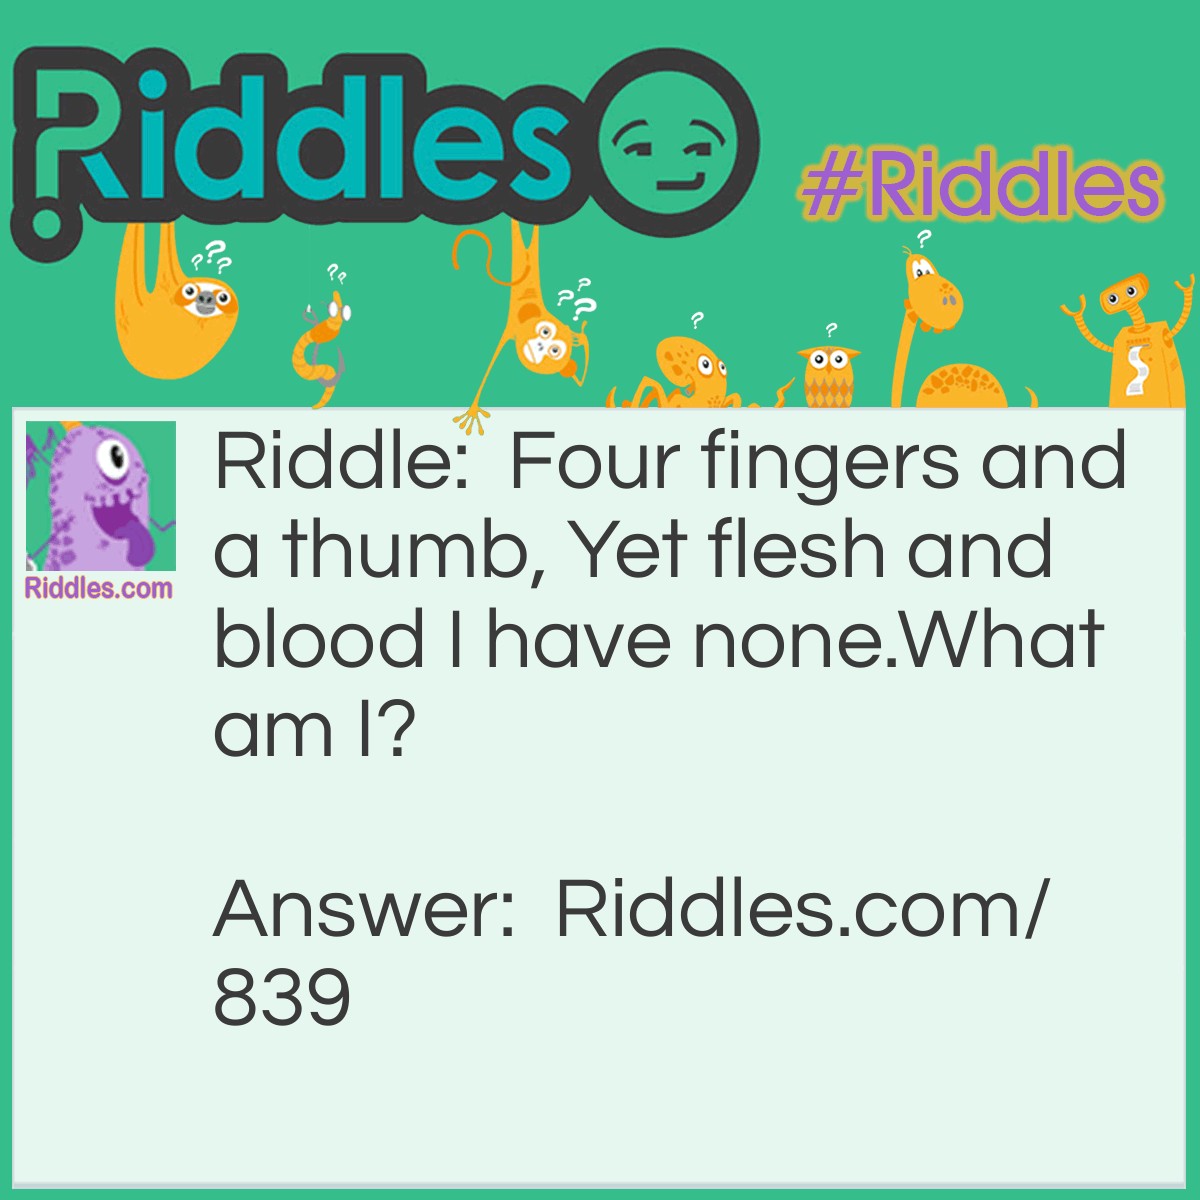 Riddle: Four fingers and a thumb, Yet flesh and blood I have none.
What am I? Answer: A pair of gloves.